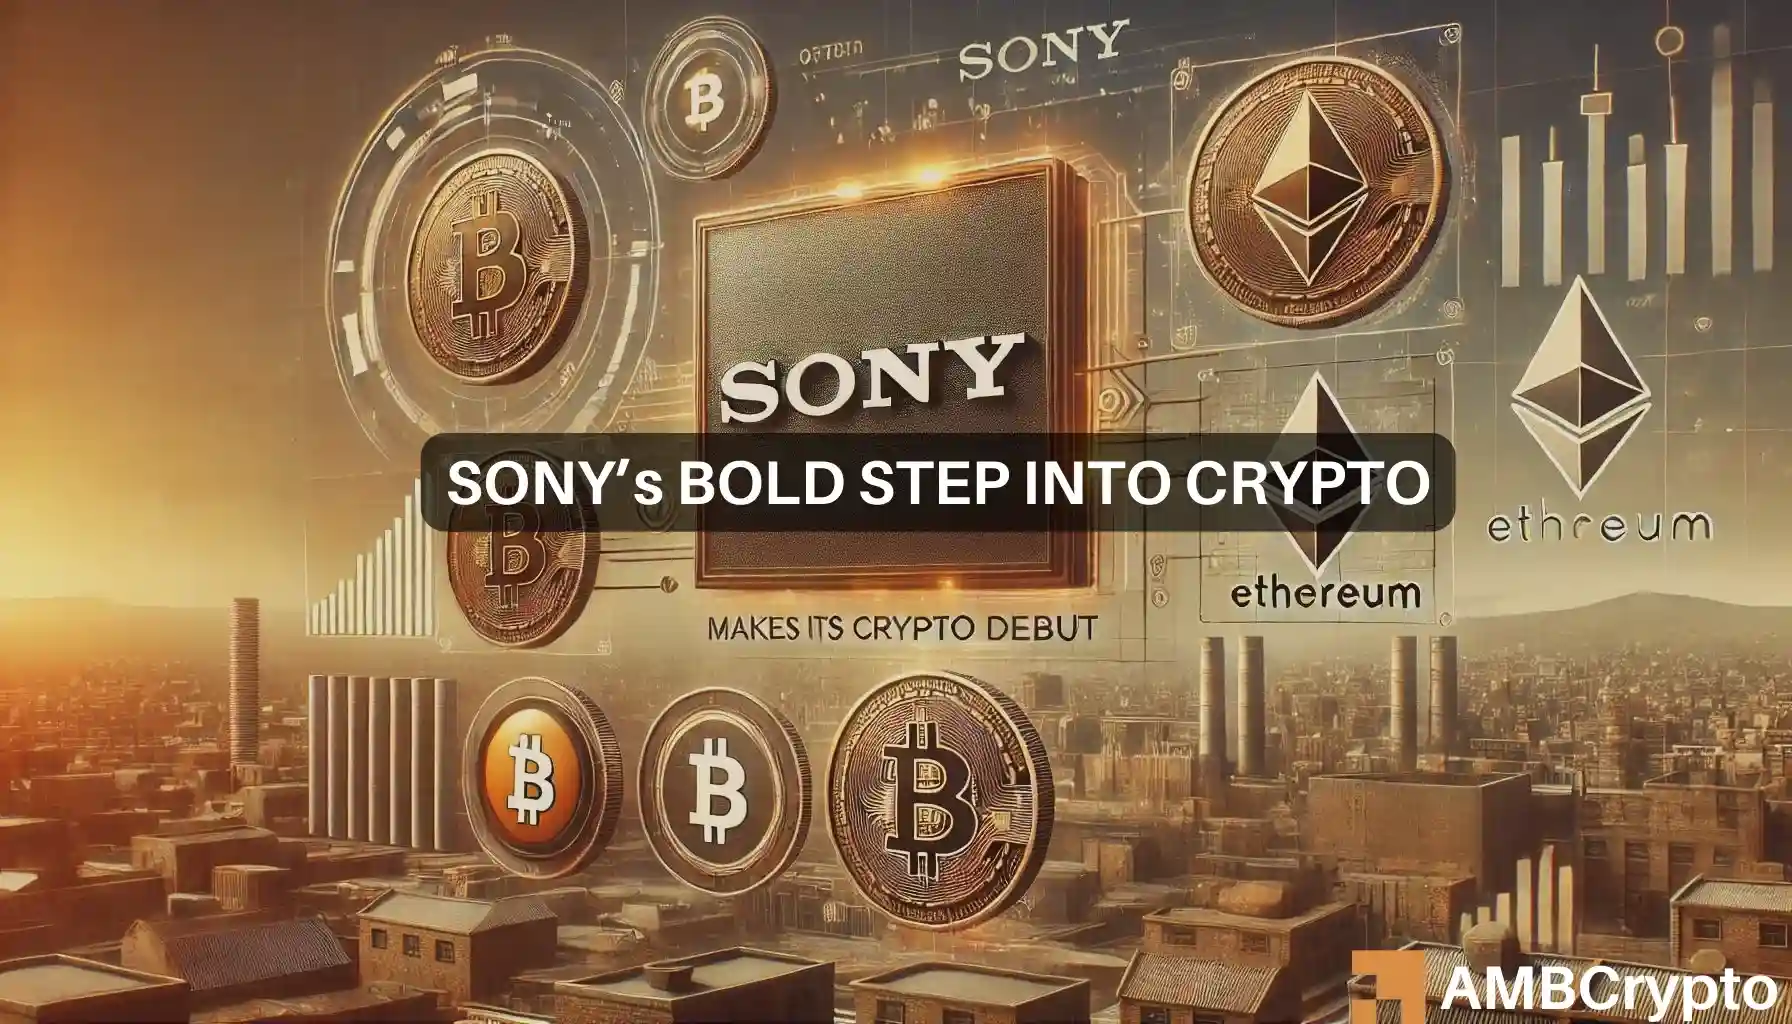 Sony's crypto debut: Tech giant acquires Amber Japan in major move